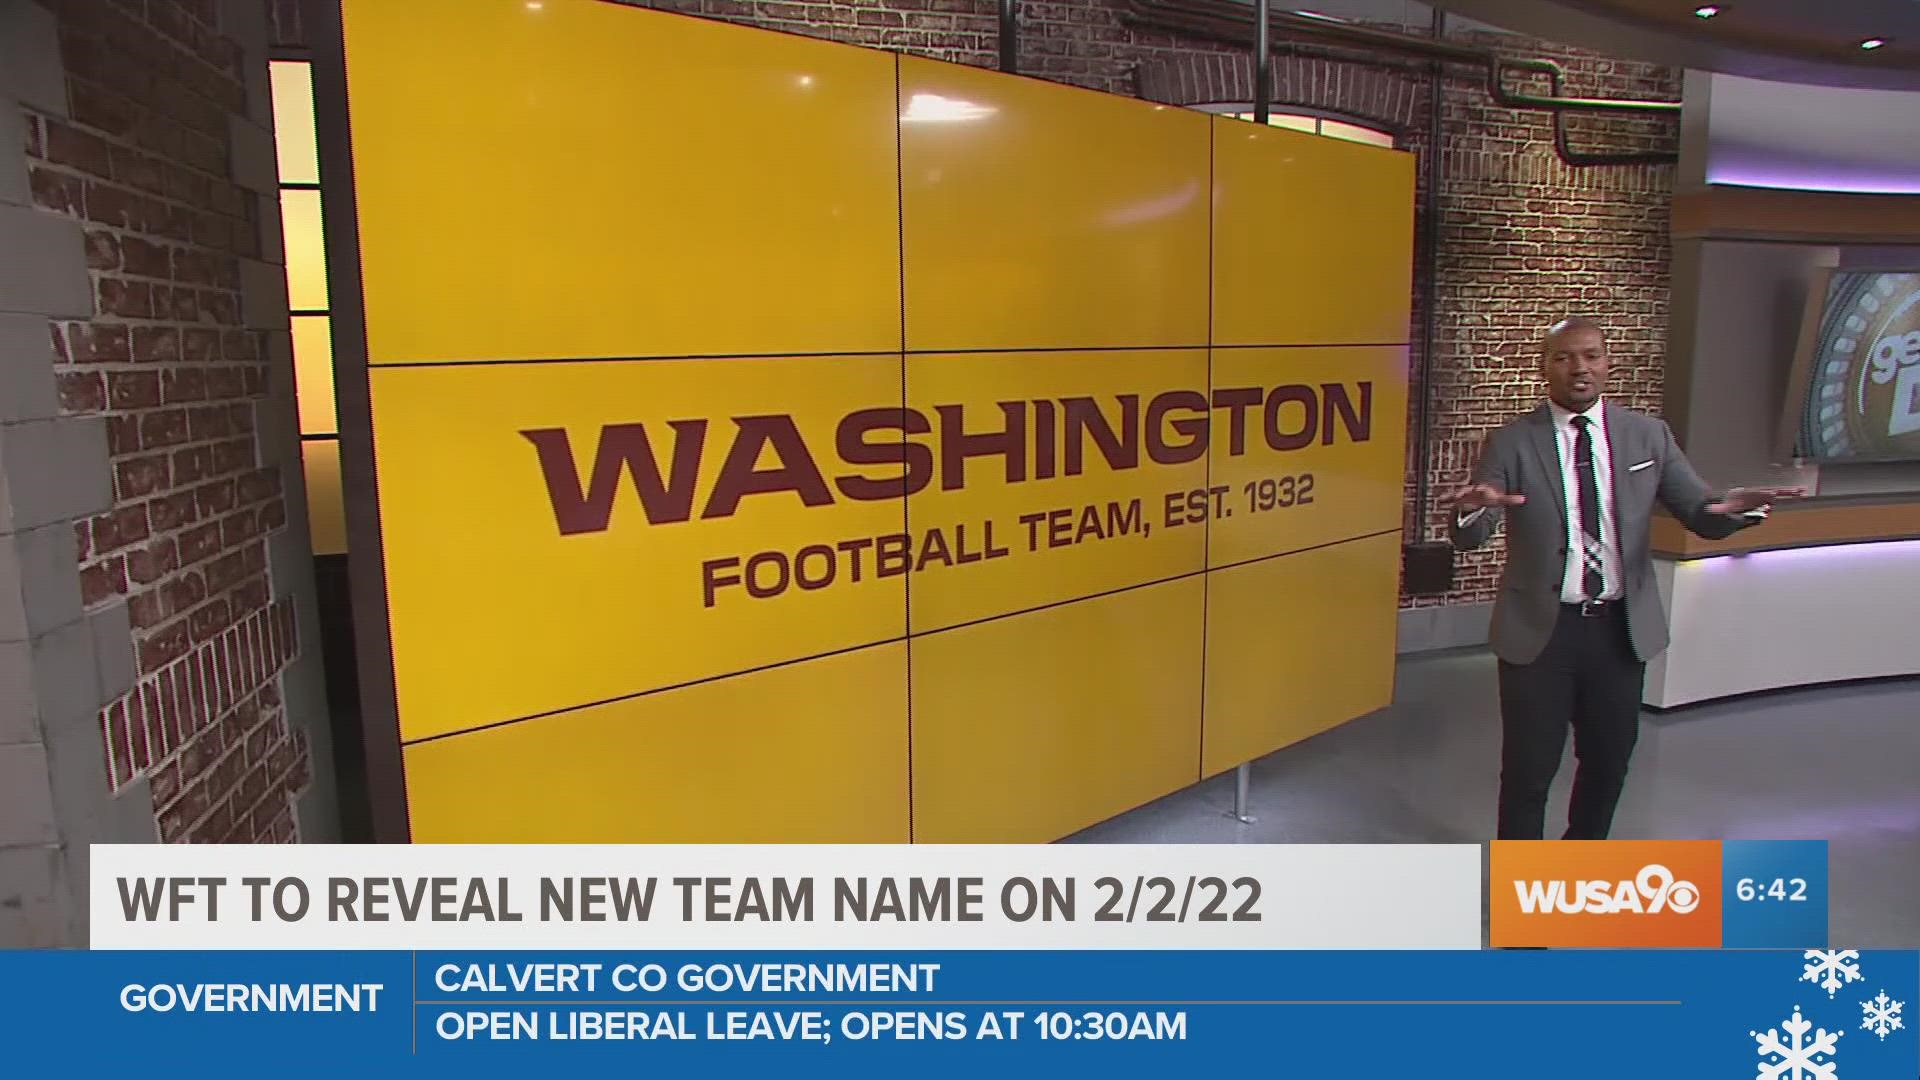 The Washington Football Team will reveal their new name on February 2nd, 2022